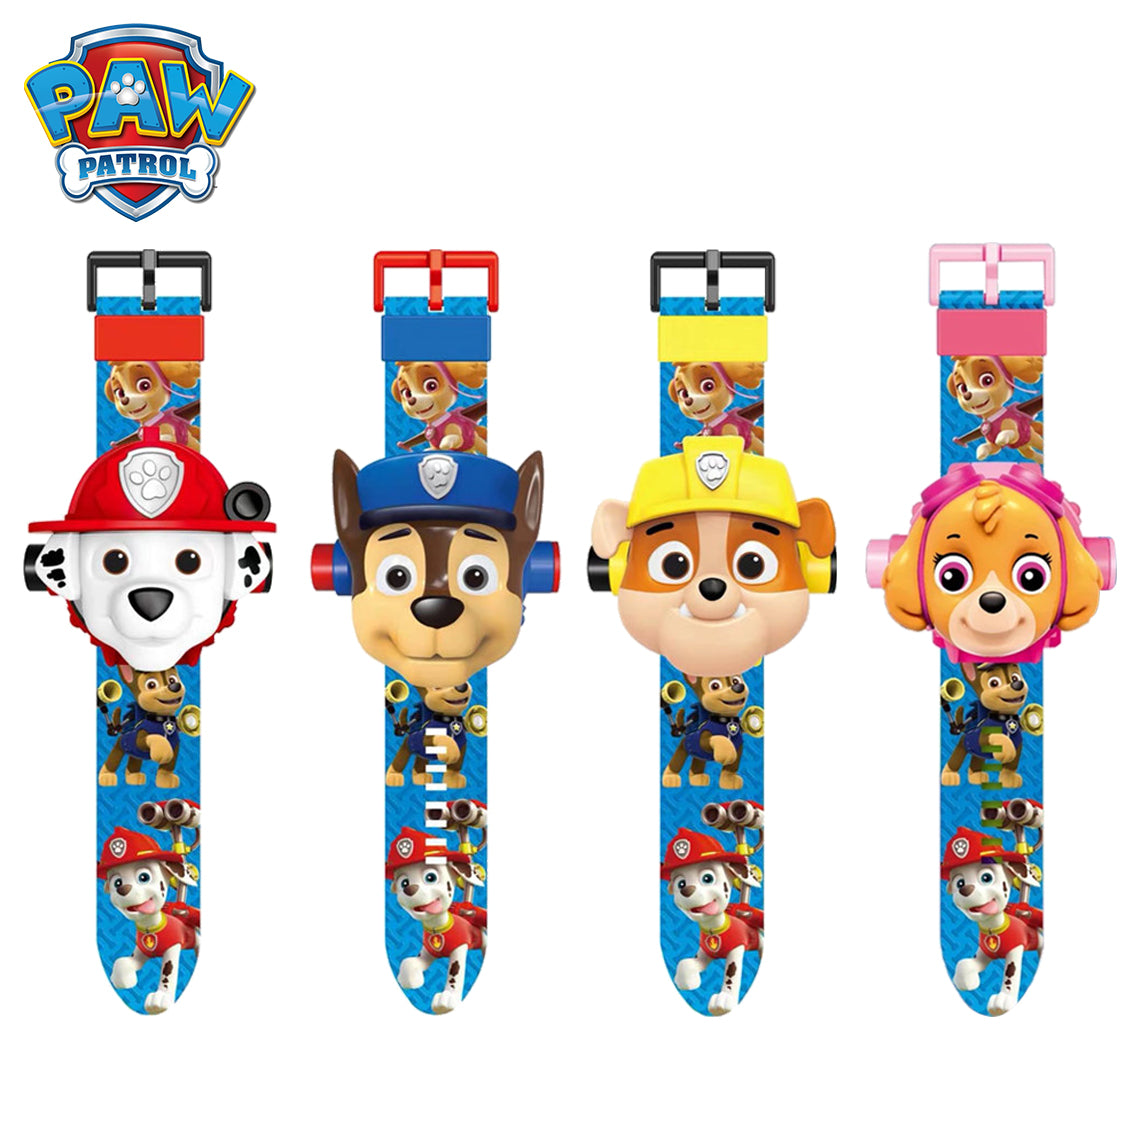 Paw Patrol Adventure: 3D Projection Digital Watch and Action Figures Set